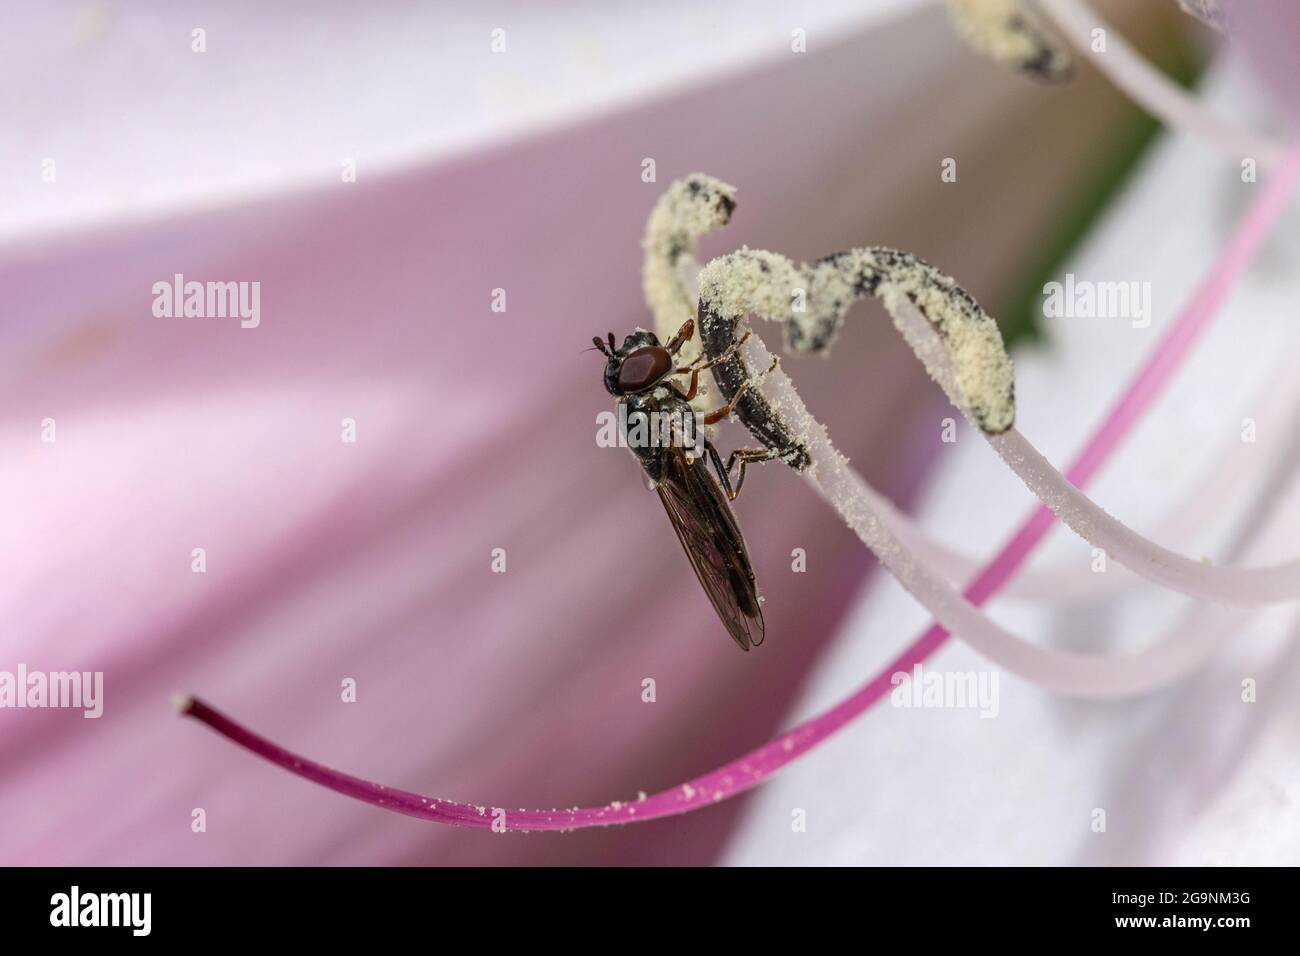 Small Hoverfly (Platycheirus albimanus) Feeding on Pollen From a Pink Garden Flower in Late Summer. Hoverflies Are the Most Efficient Pollinators. Stock Photo